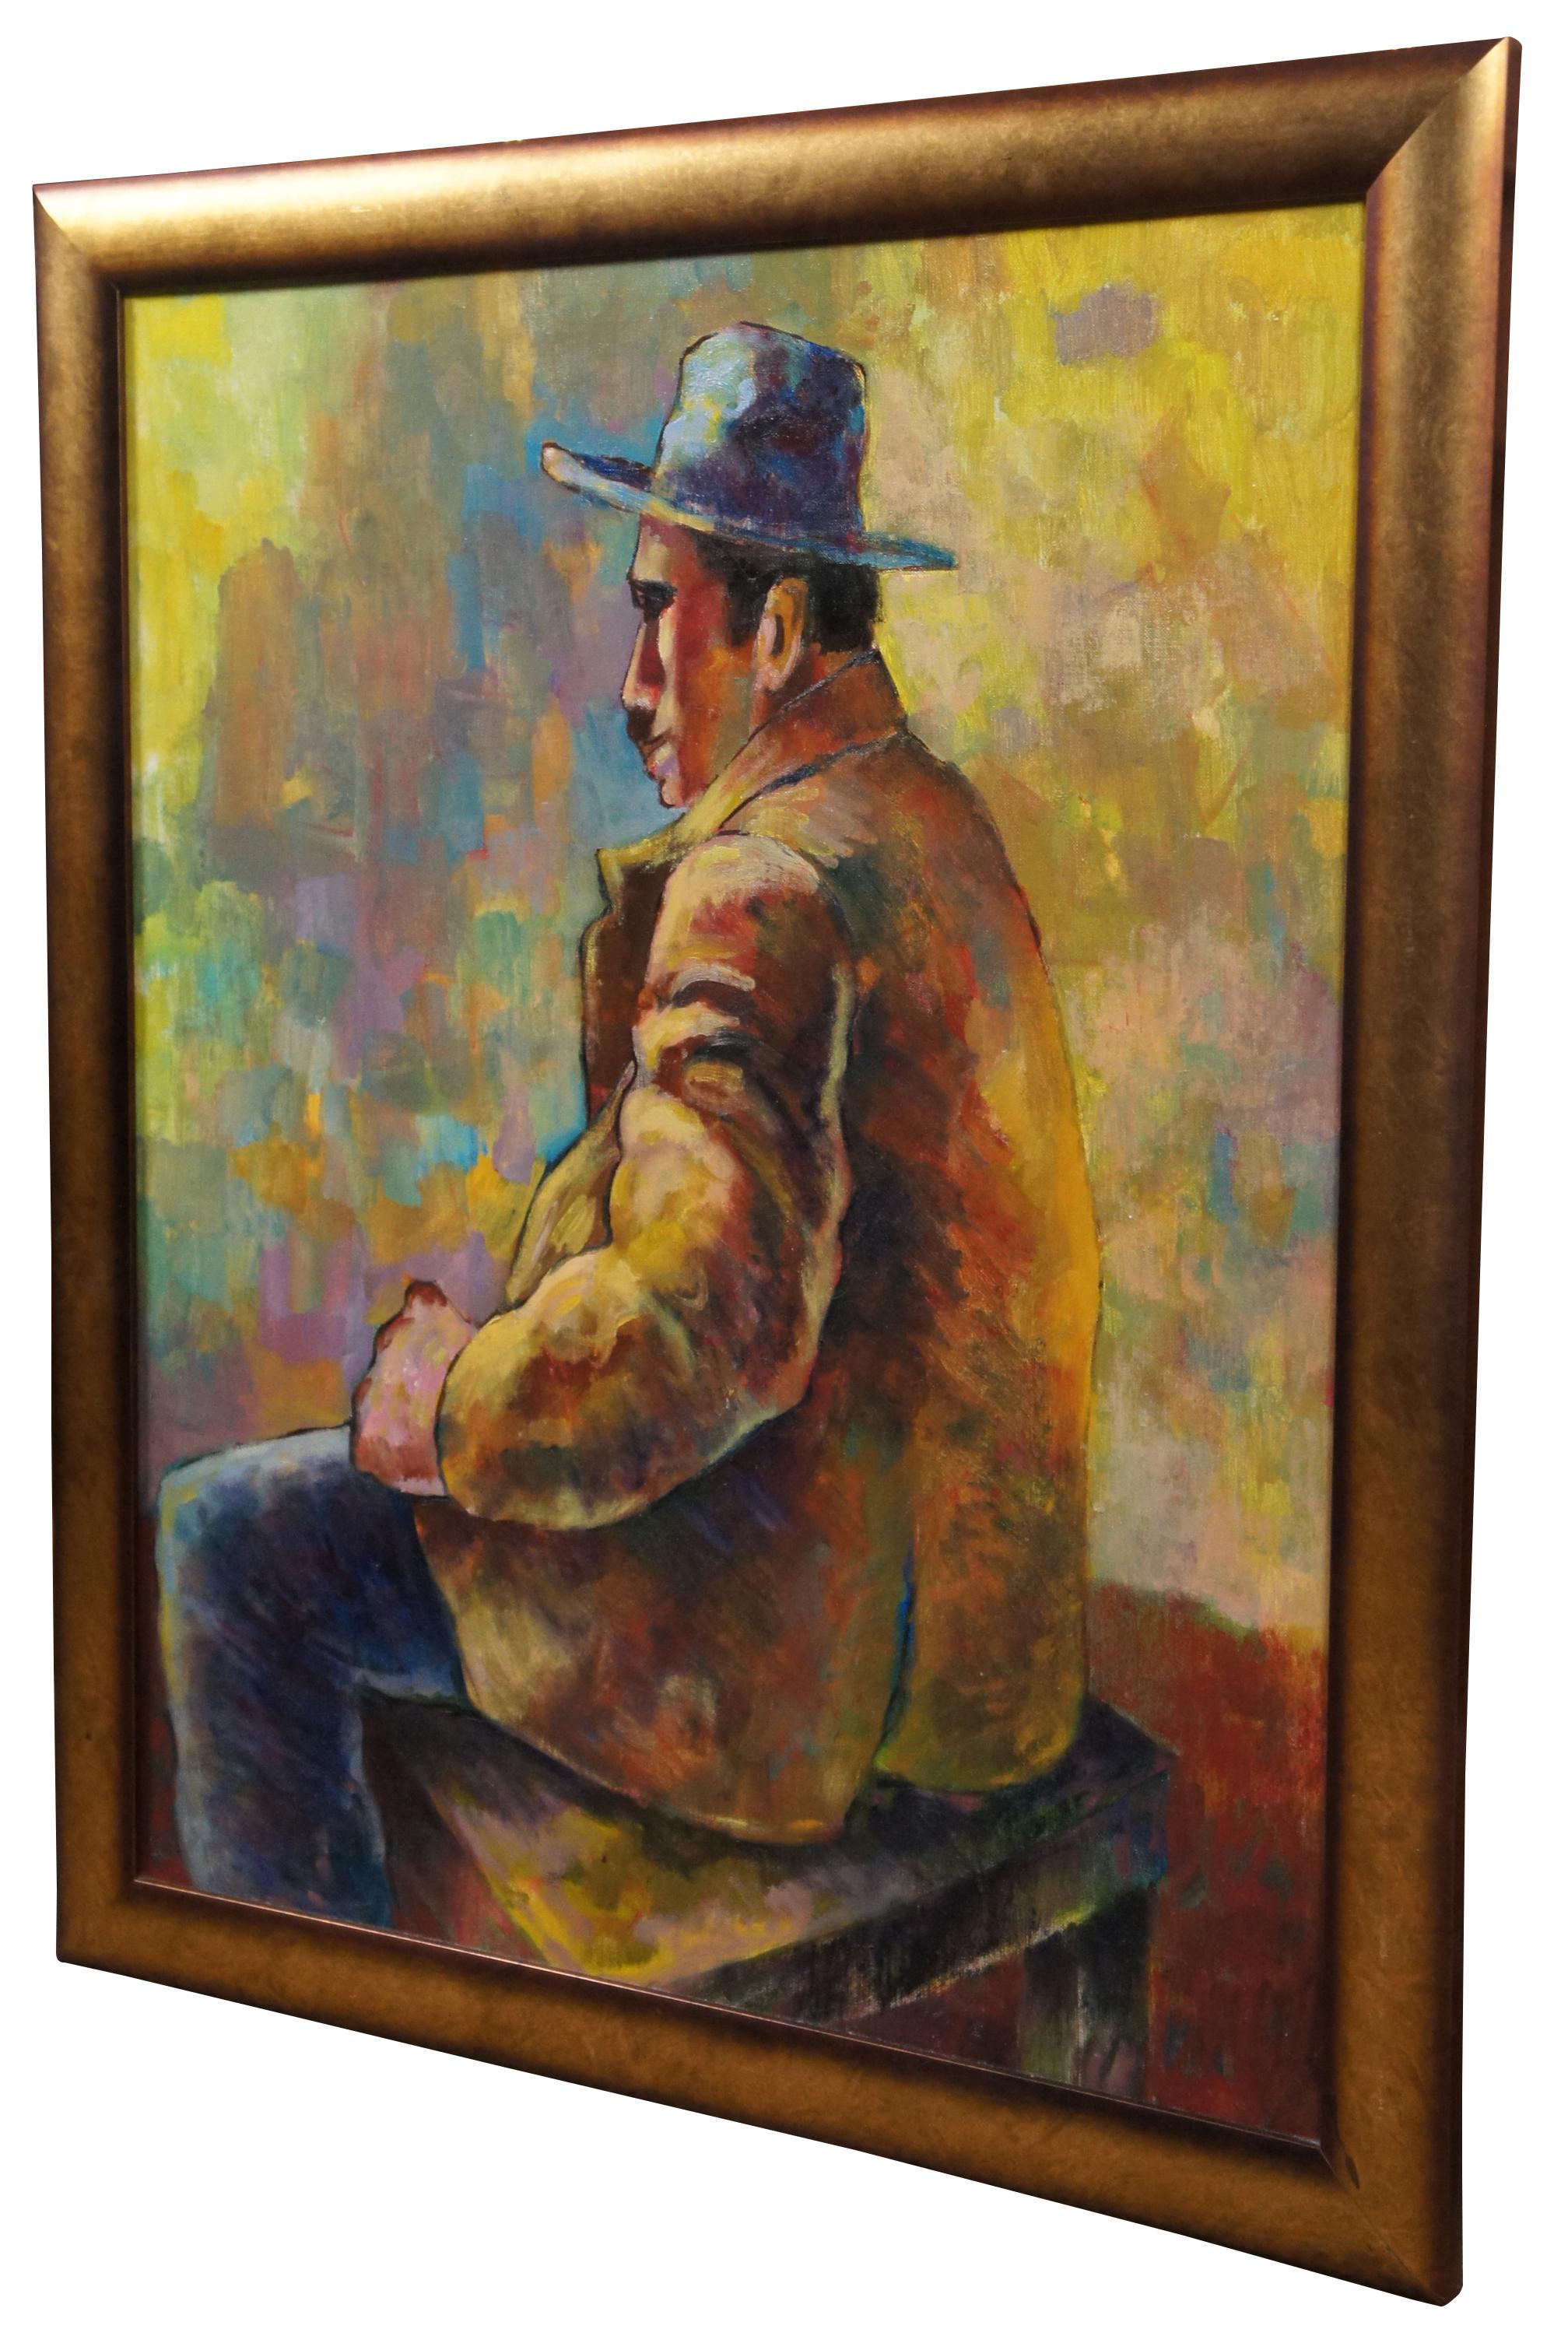 Vintage original oil on canvas board painting of a man in a hat and jacket with his back to the artist. From the estate of Louis Wolchonok.

Measures: Sans frame - 23” x 29”, 33